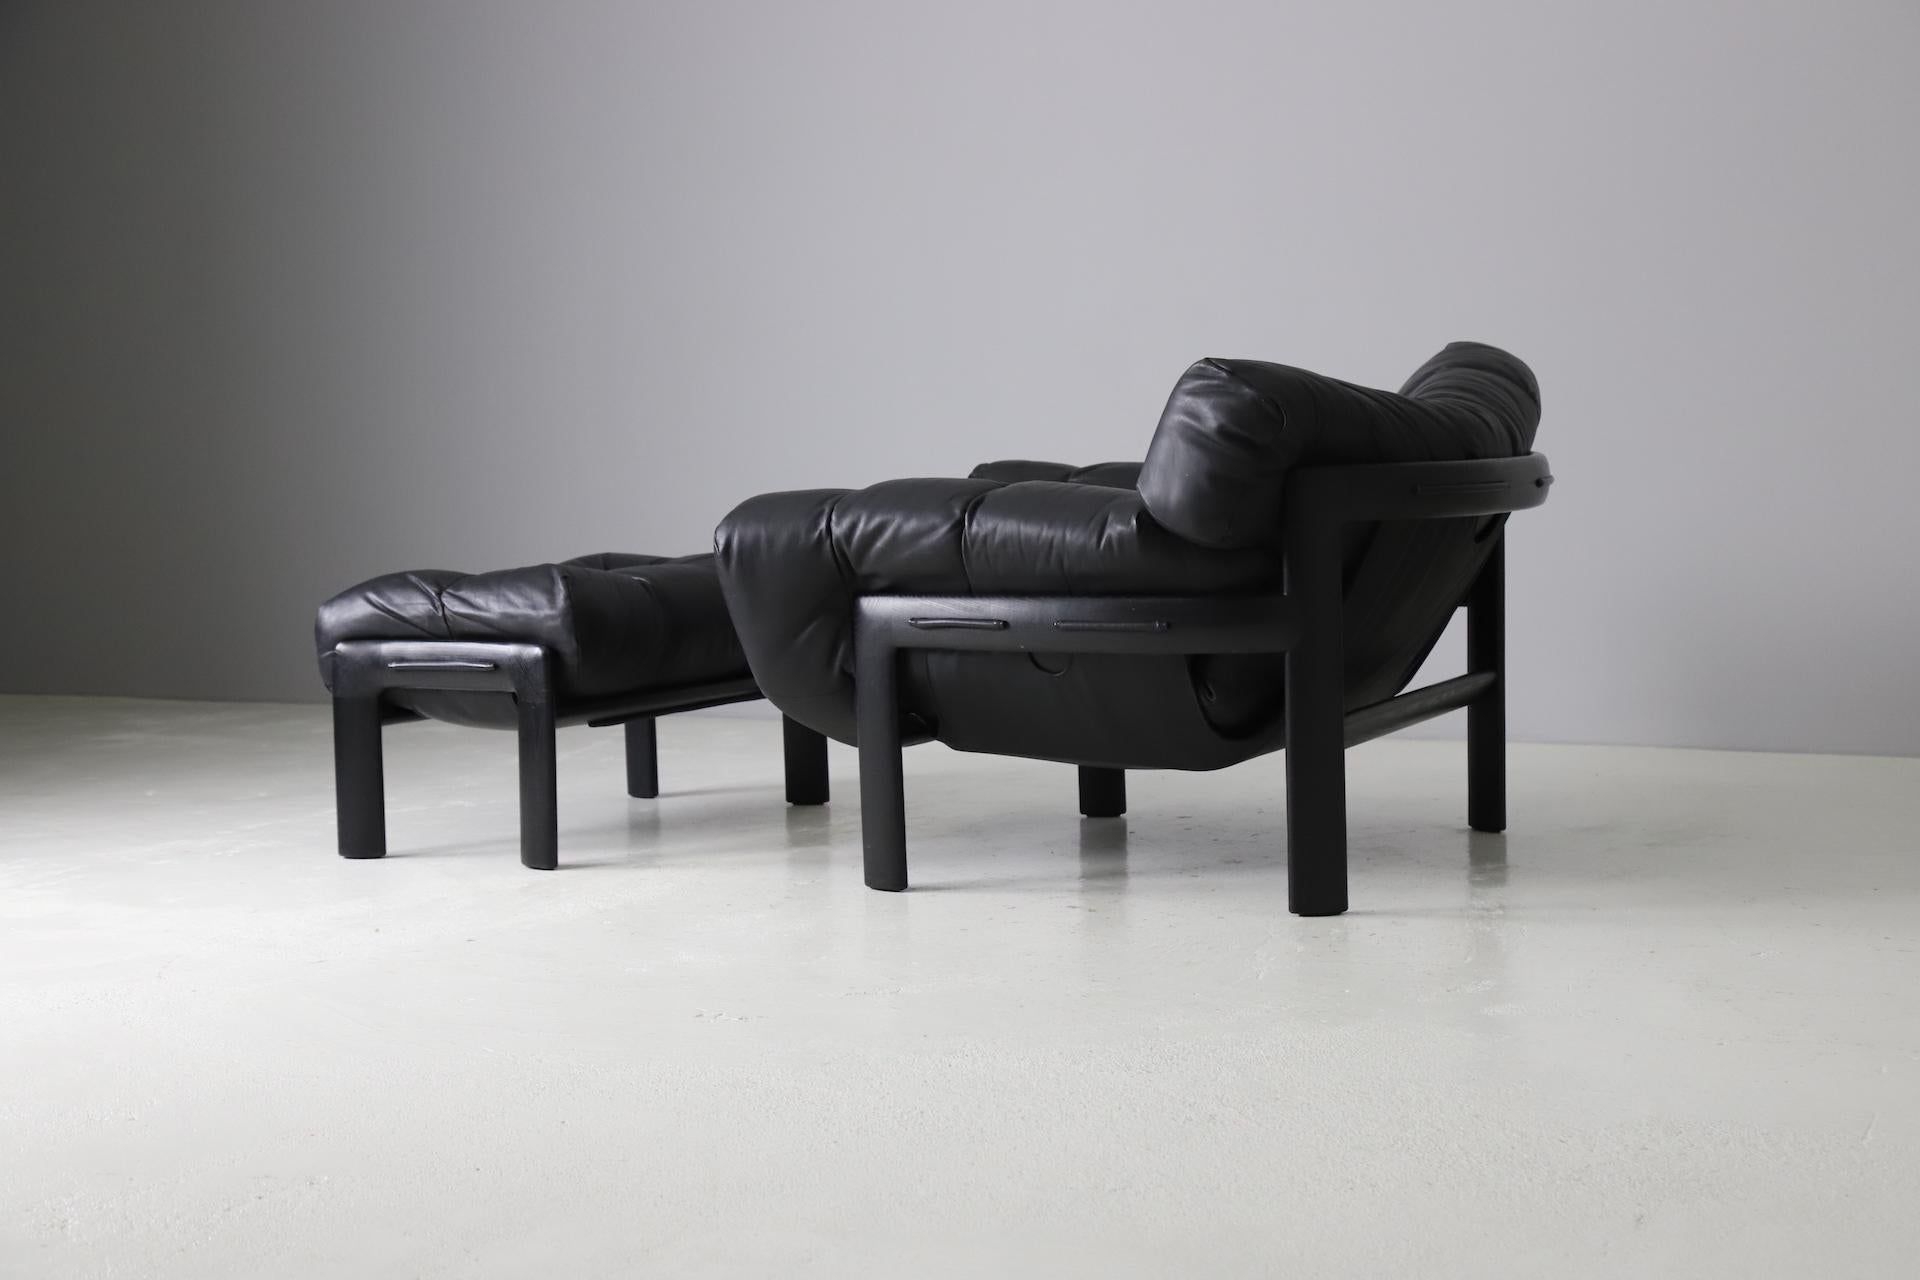 This large and extremely comfortable 'Légère' lounge chair with ottoman is designed by well known designer Angelo Mangiarotti and Chiaro Pampo. Produced by high end furniture producer Rosenthal in Germany. The chair is made out of black stained ash